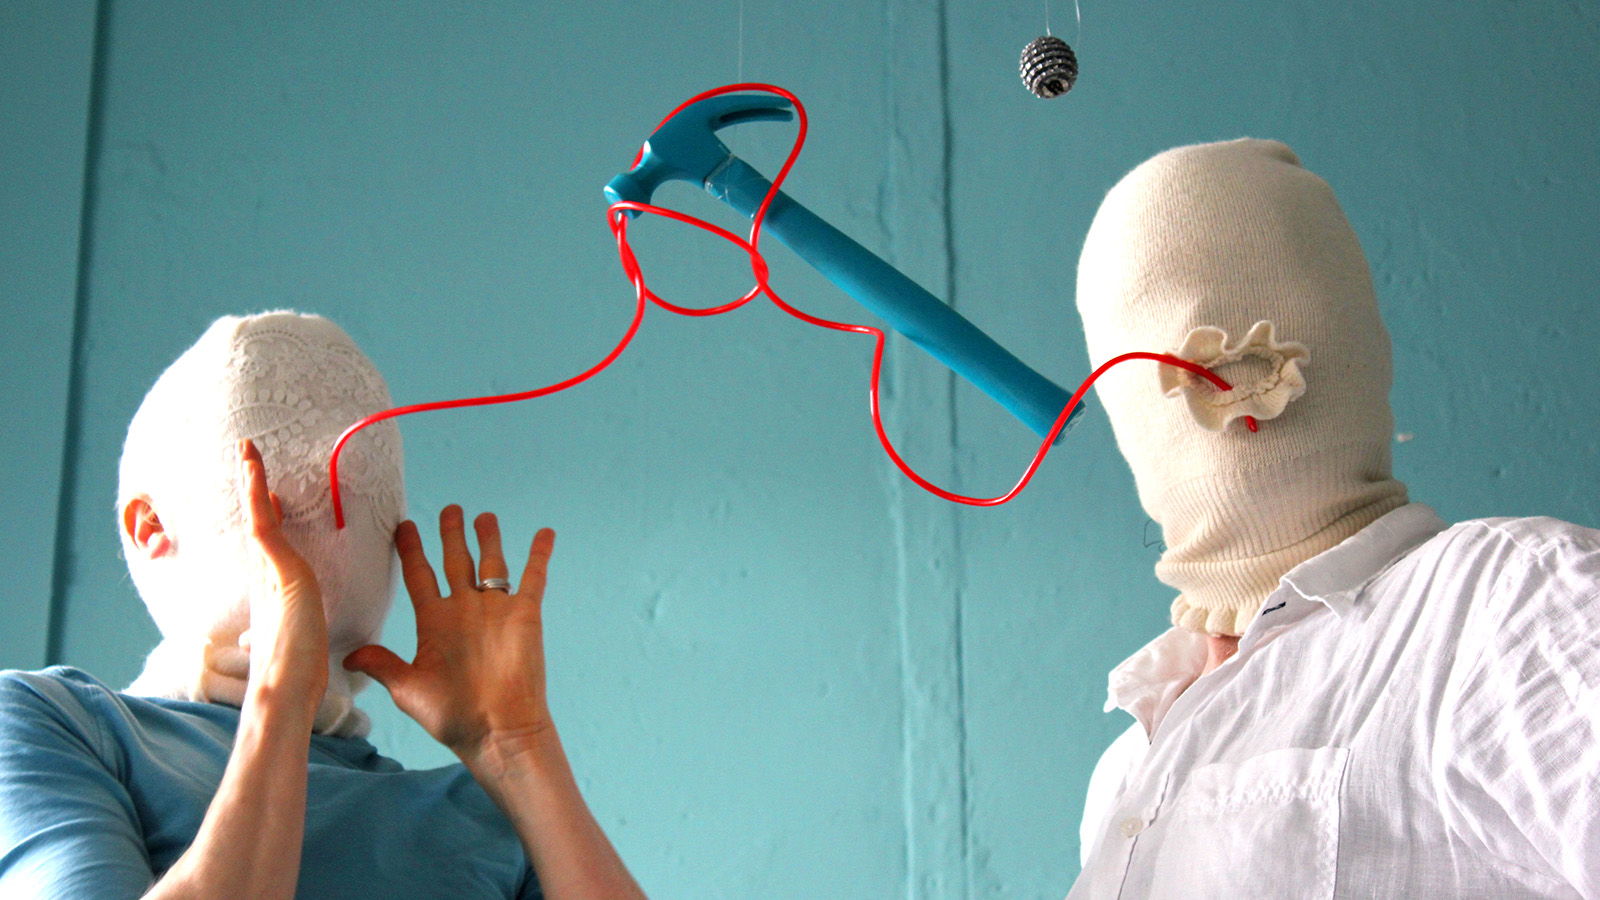 Two people wear white balaclava-like garments on their heads. There are no eye or mouth holes. A red wiggly straw connects from the mouth of one person to the other. A blue hammer is suspended by the straw. A pinecone also hangs from the ceiling.